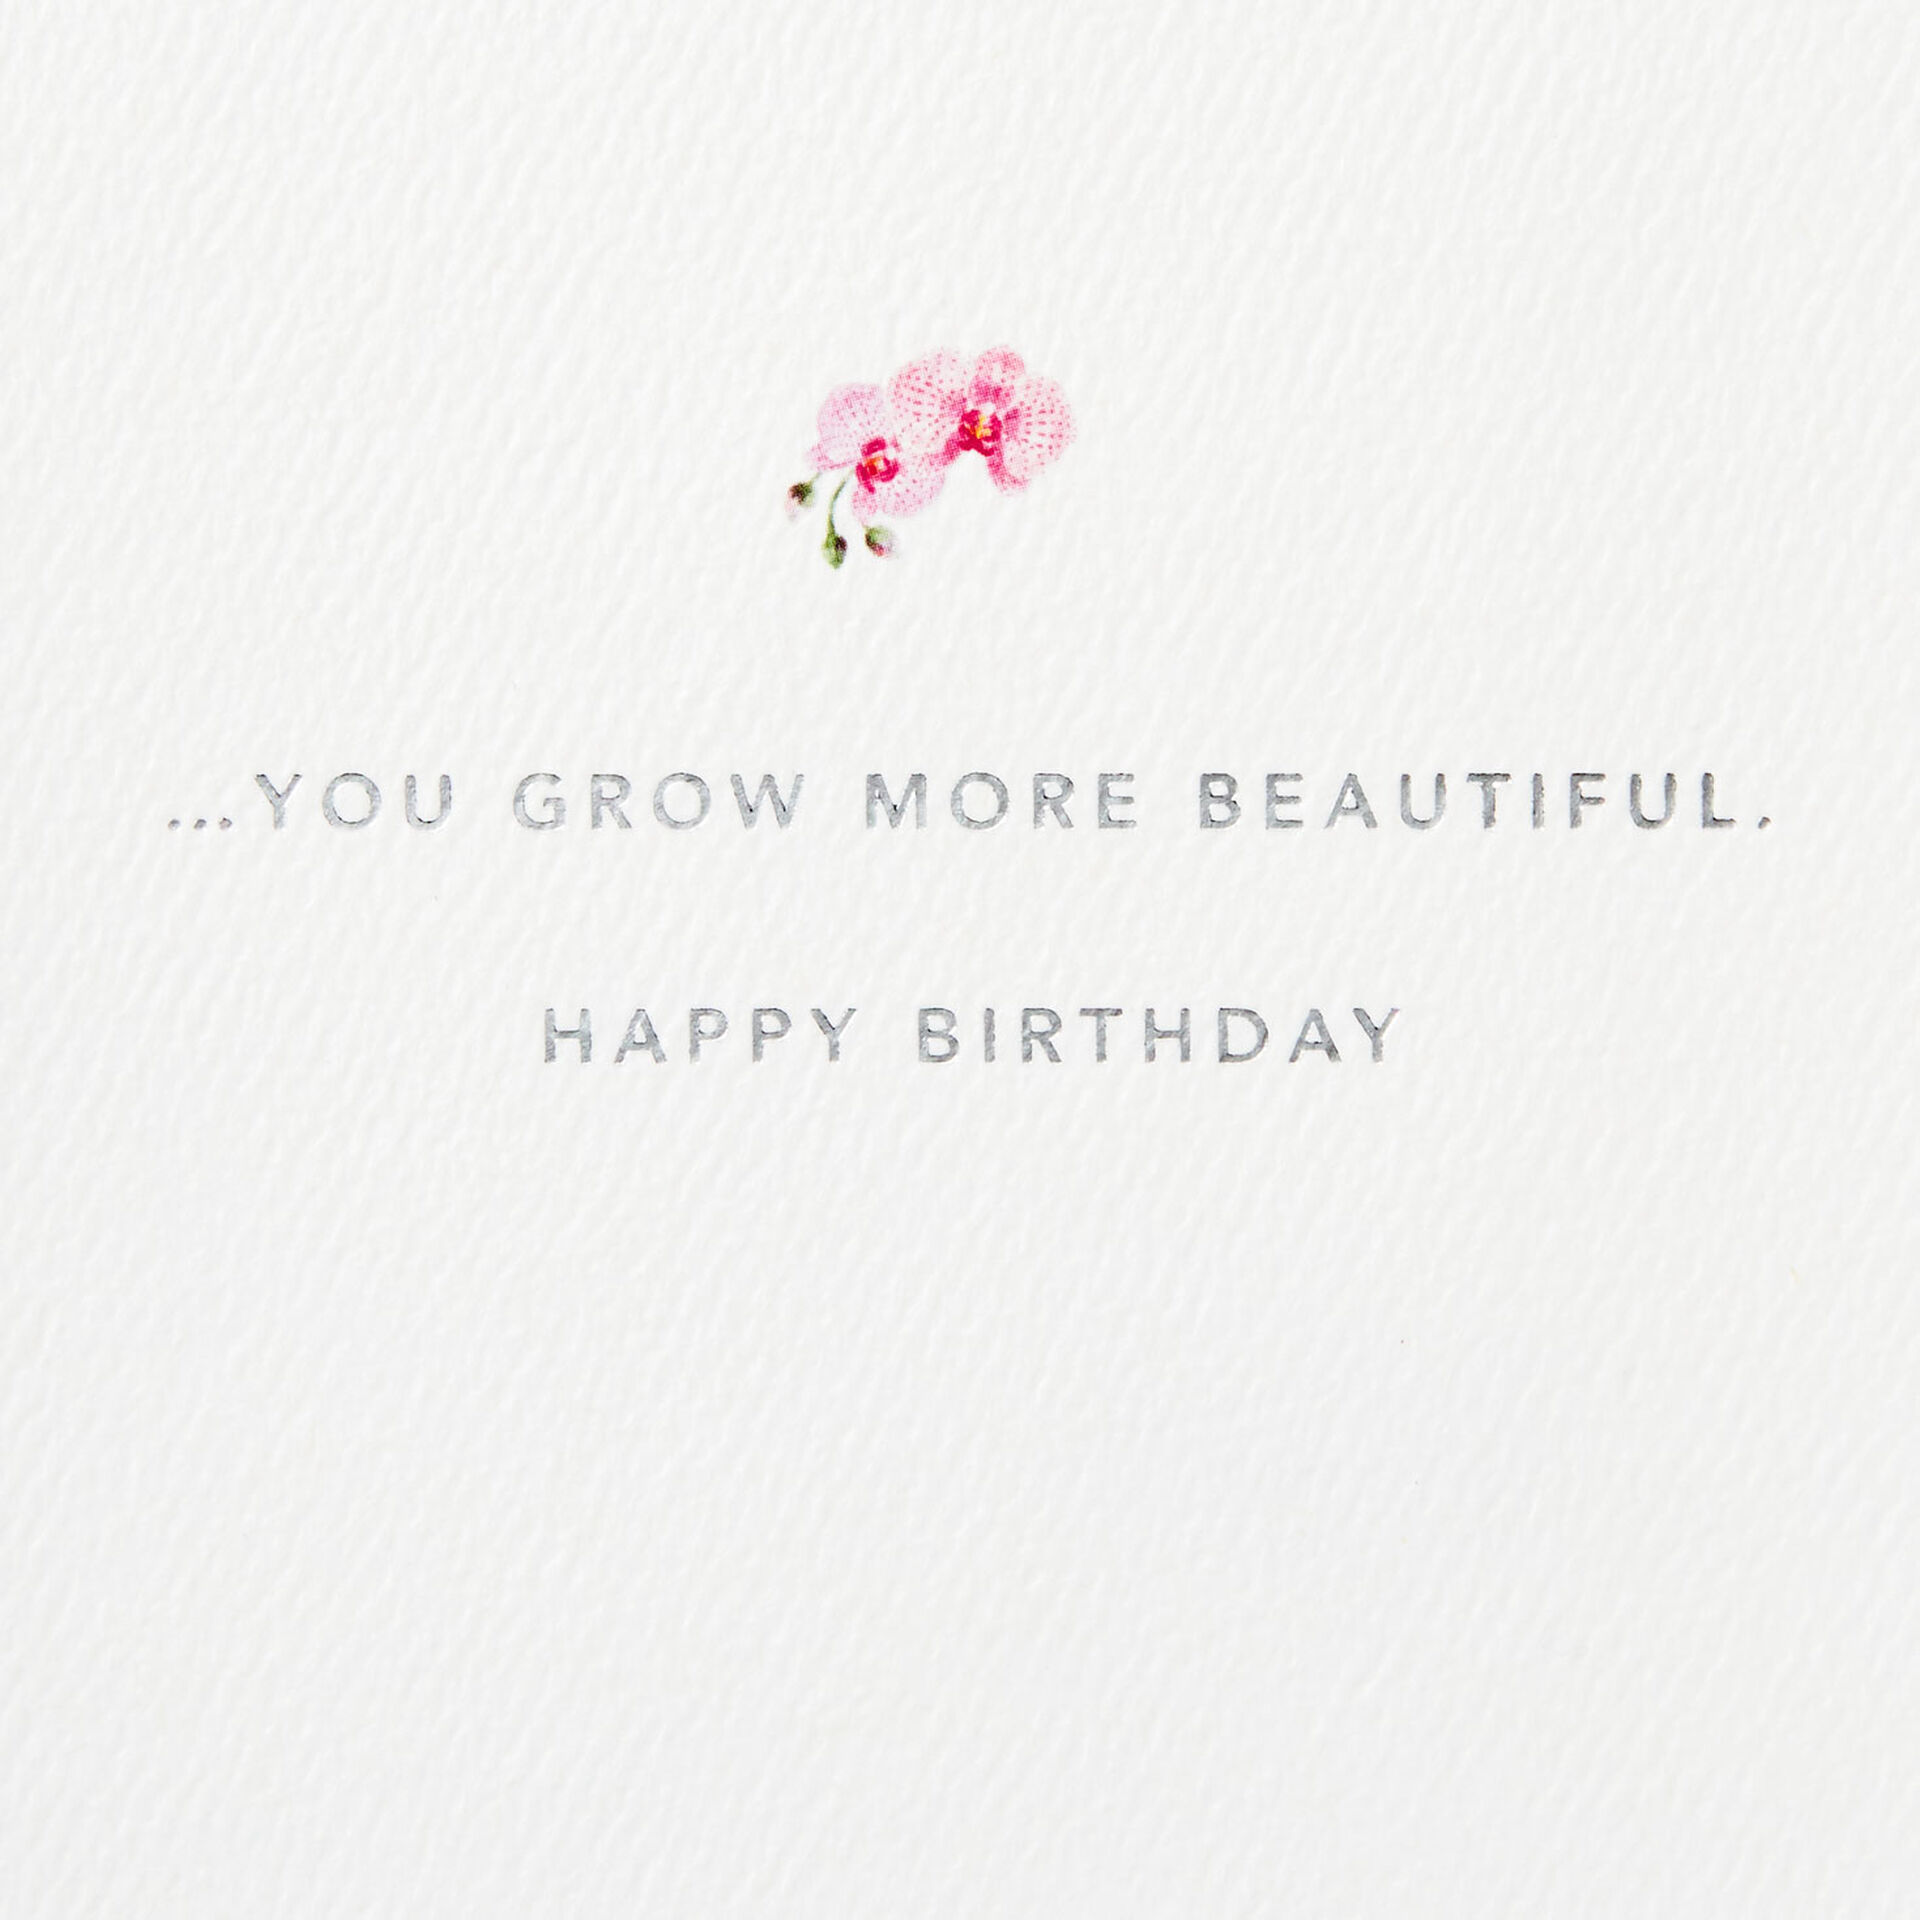 Blooming-Orchid-Birthday-Card-for-Her_699LAD9338_02